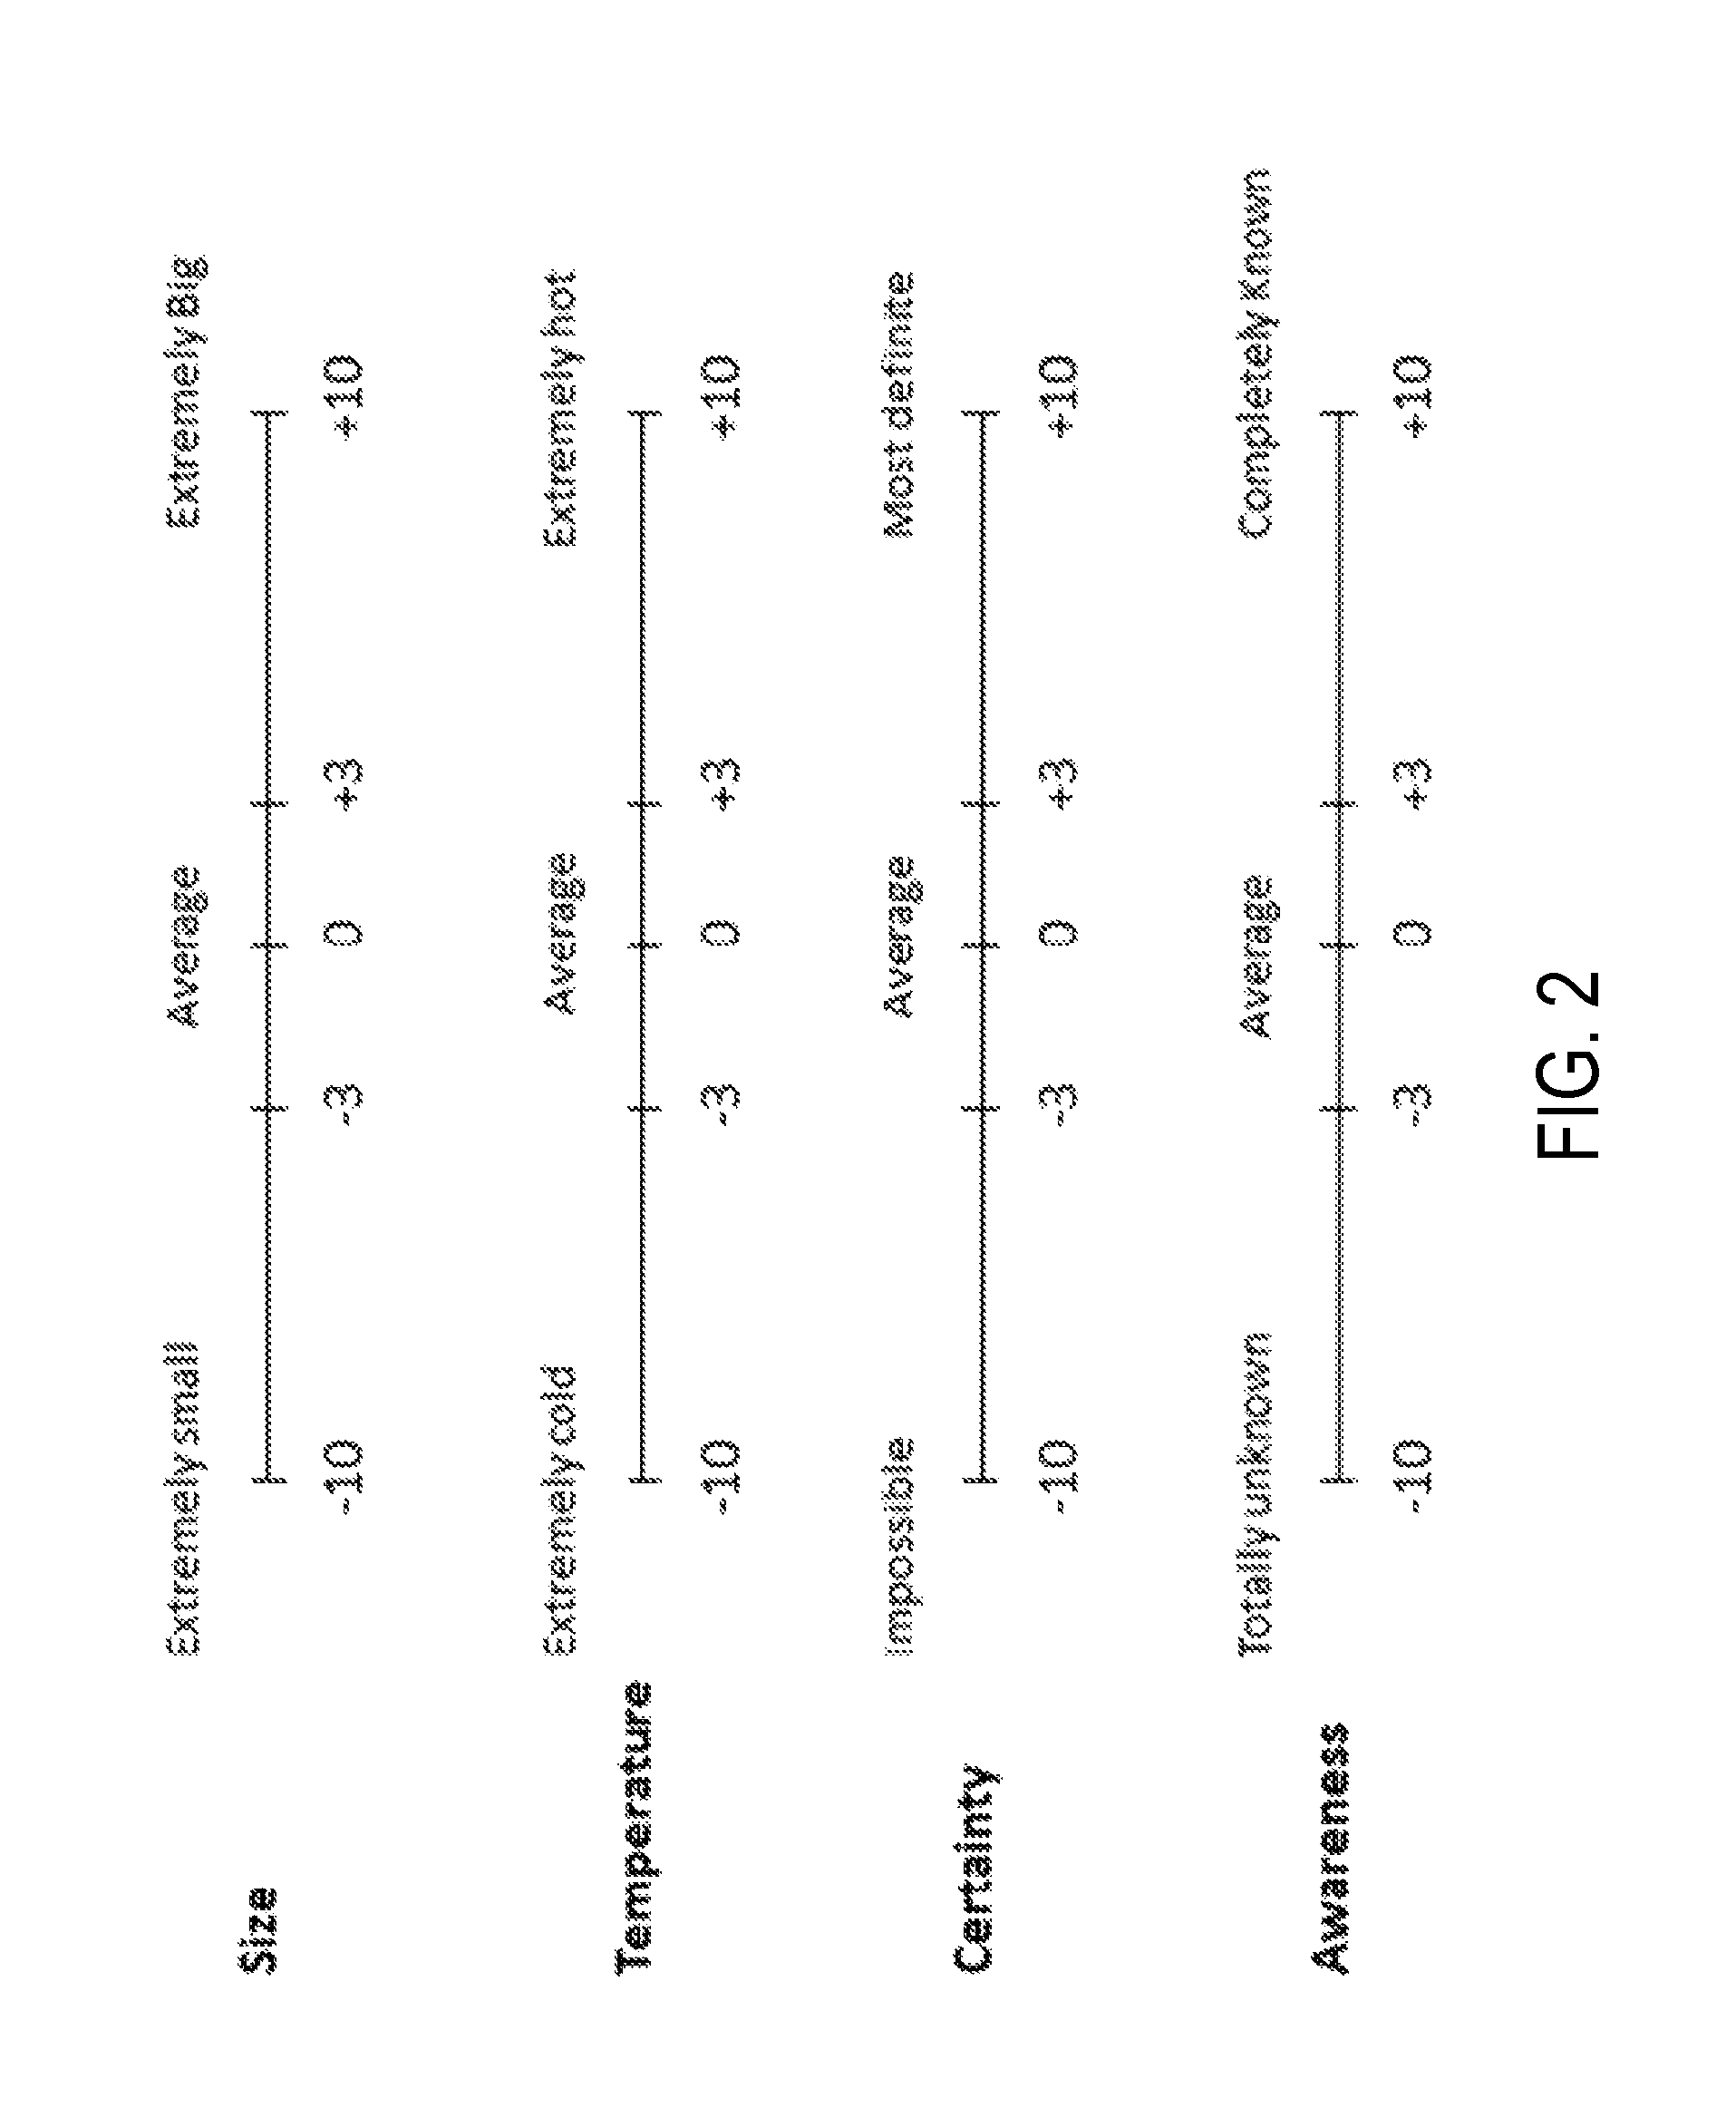 Systems and methods for natural language processing